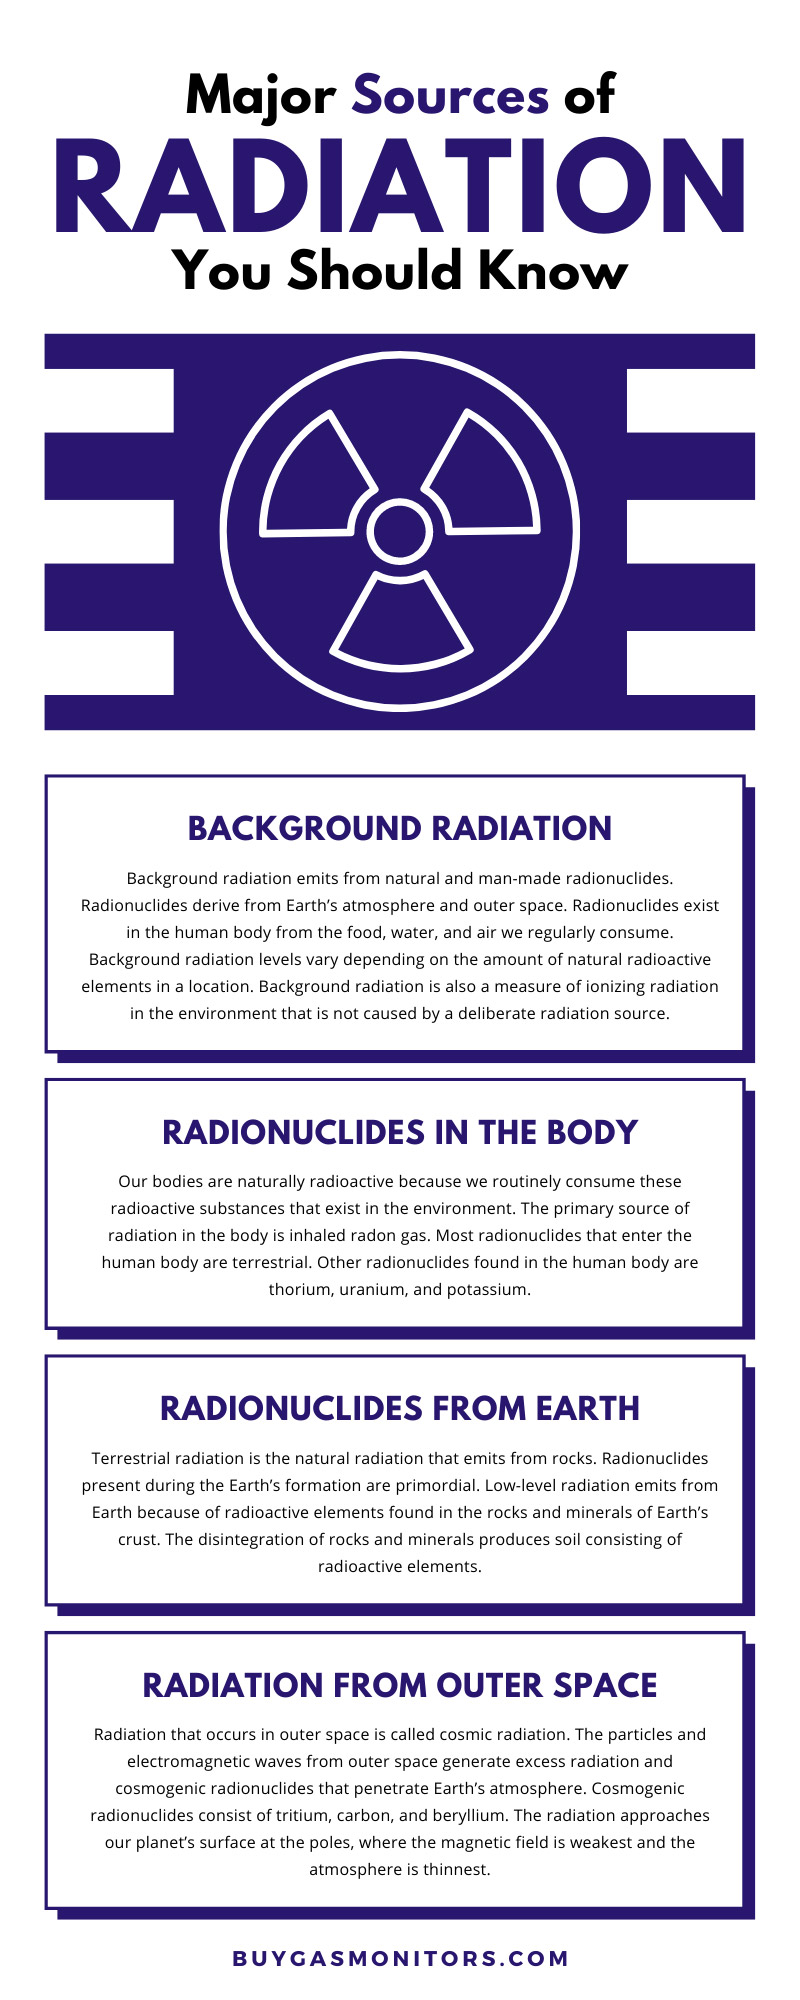 Major Sources of Radiation You Should Know